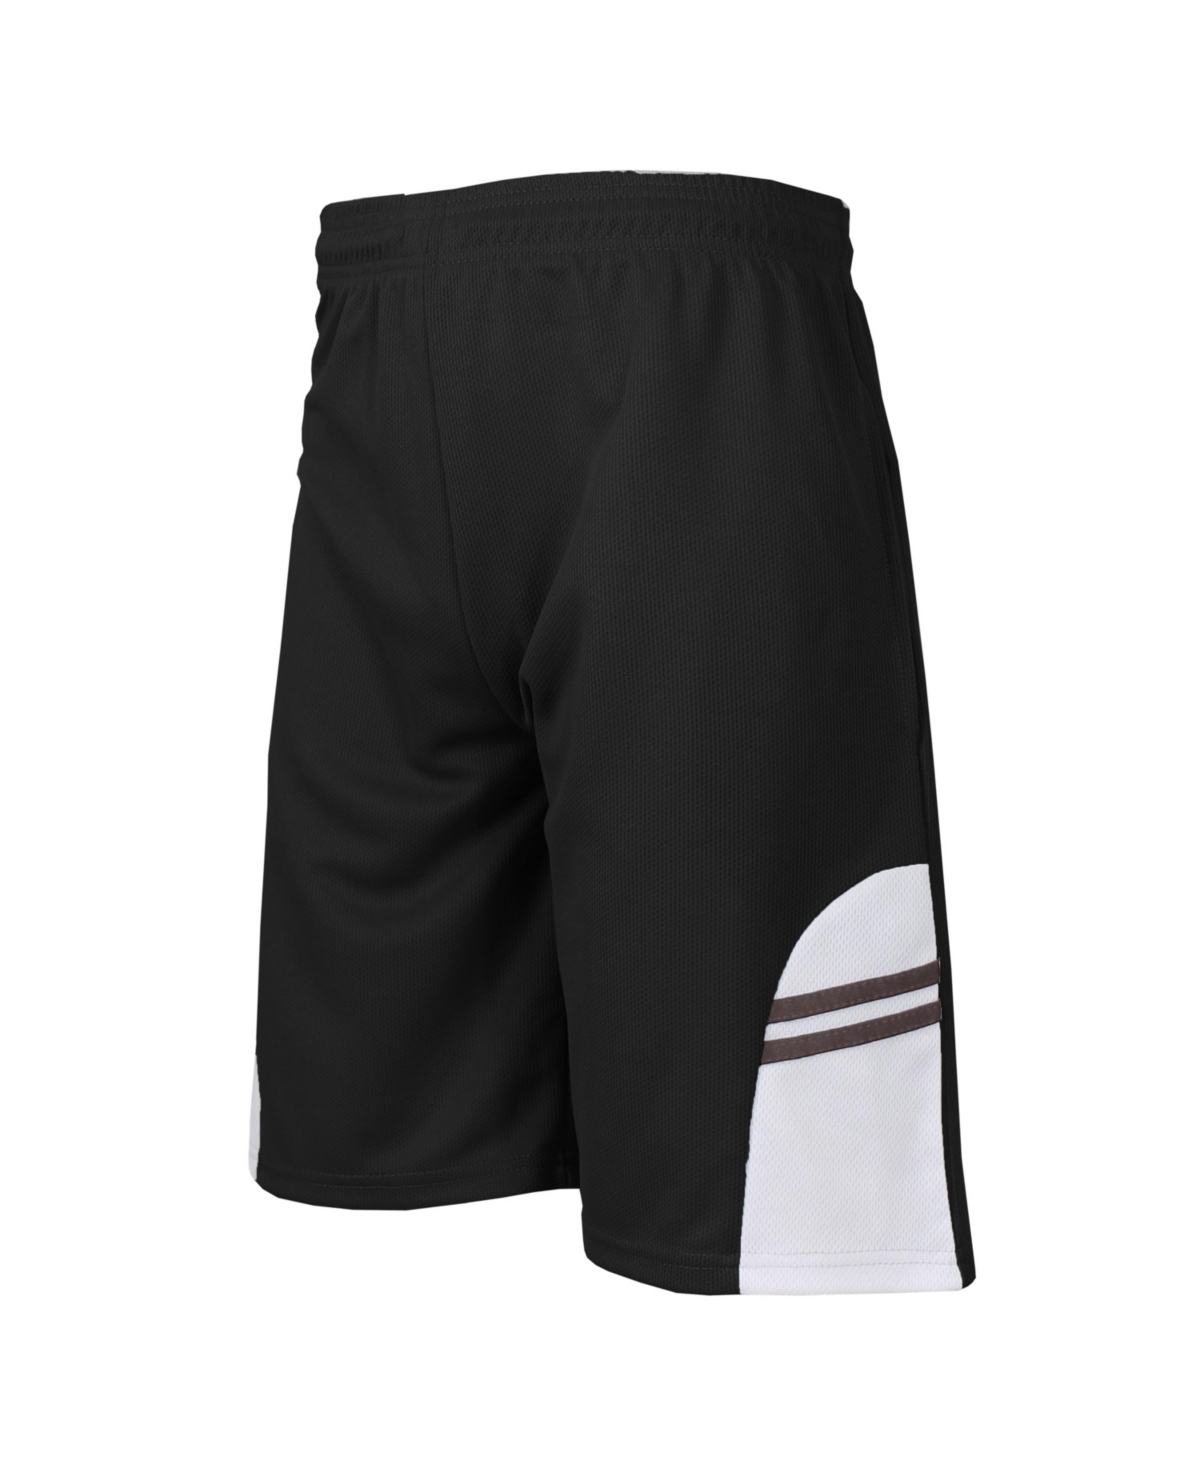 Galaxy By Harvic Men's Moisture Wicking Shorts With Side Trim Design In Black